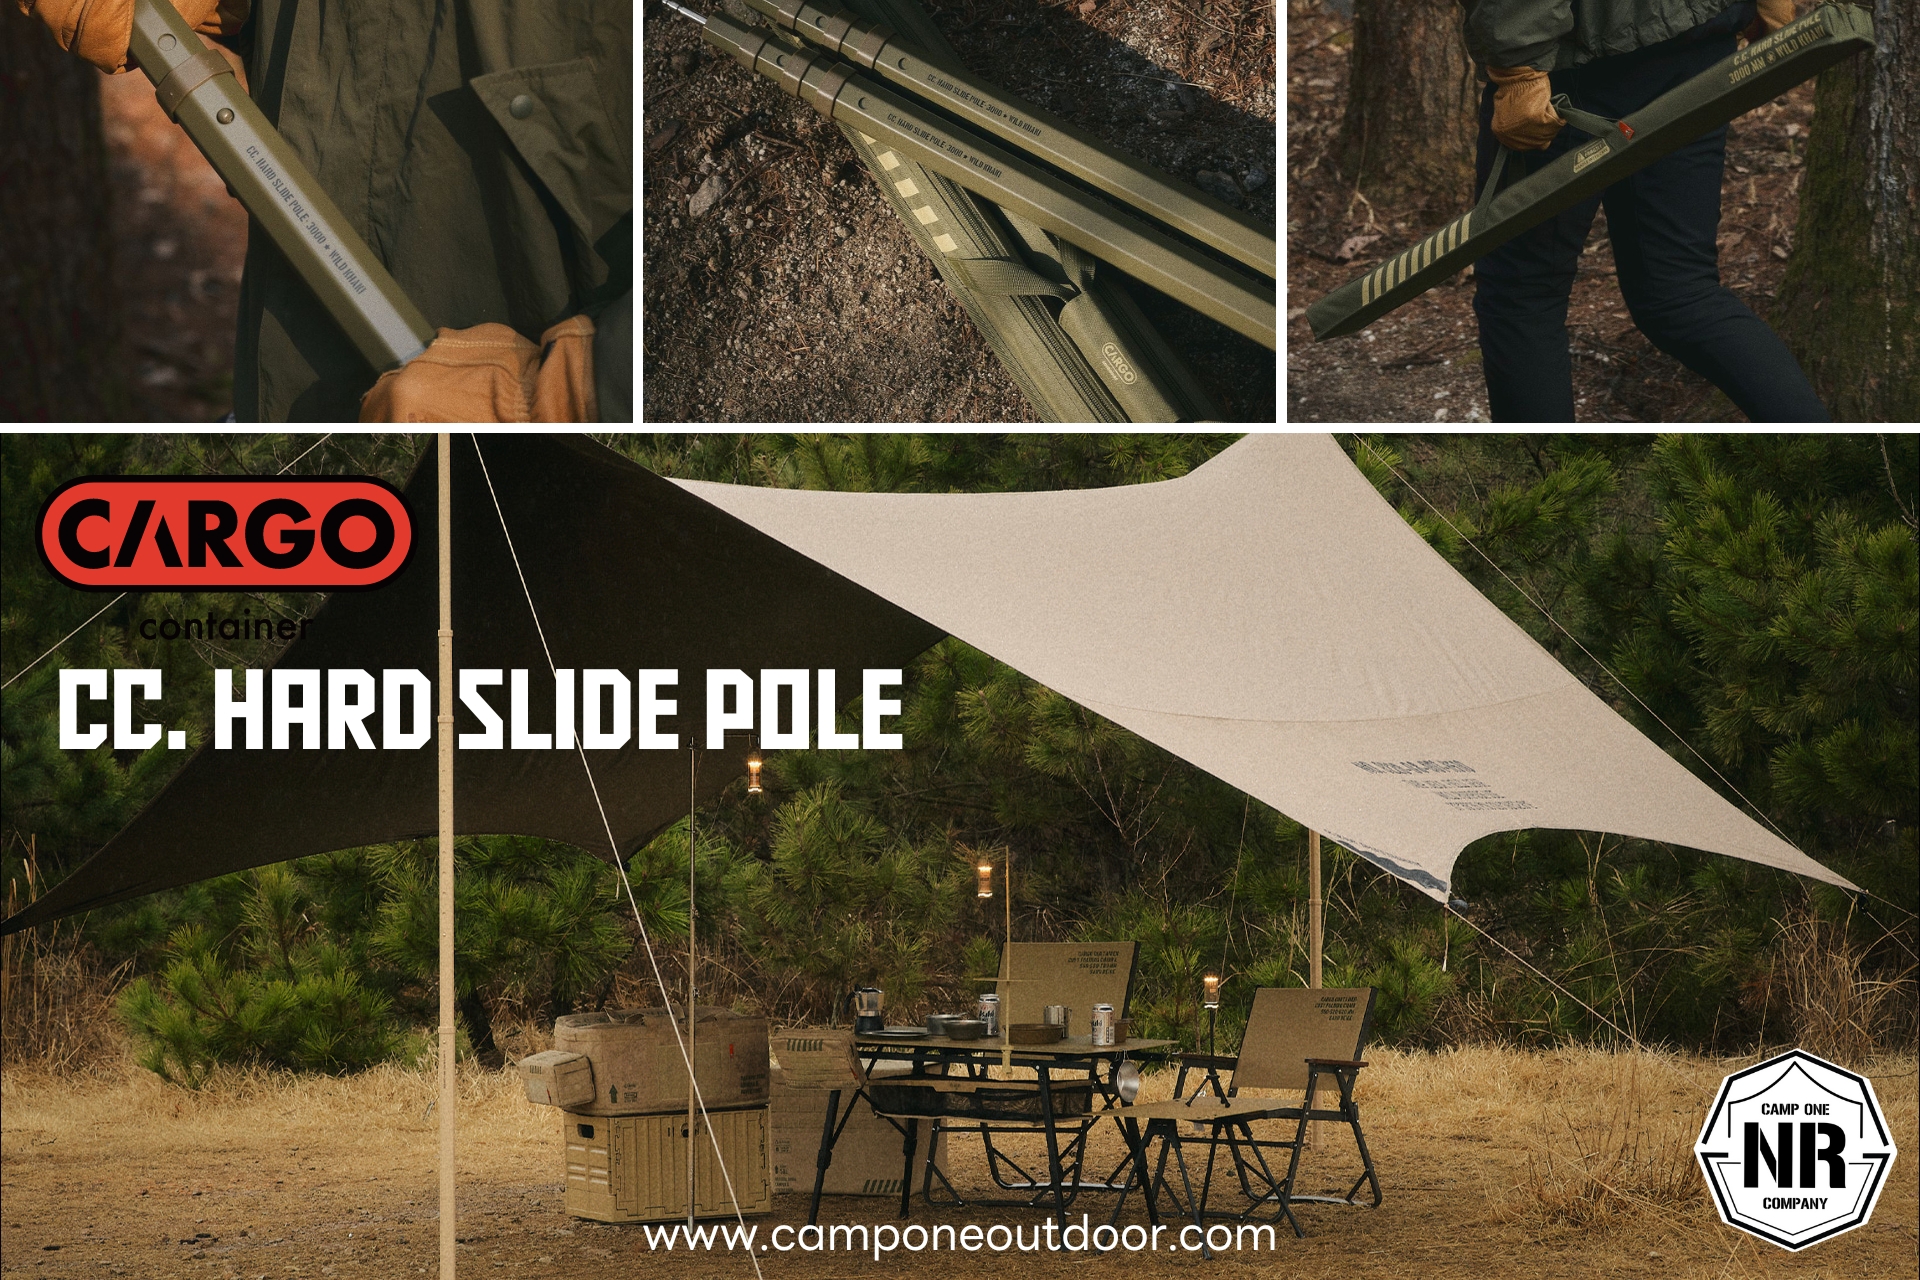 CARGO CONTAINER HARD SLIDE POLE